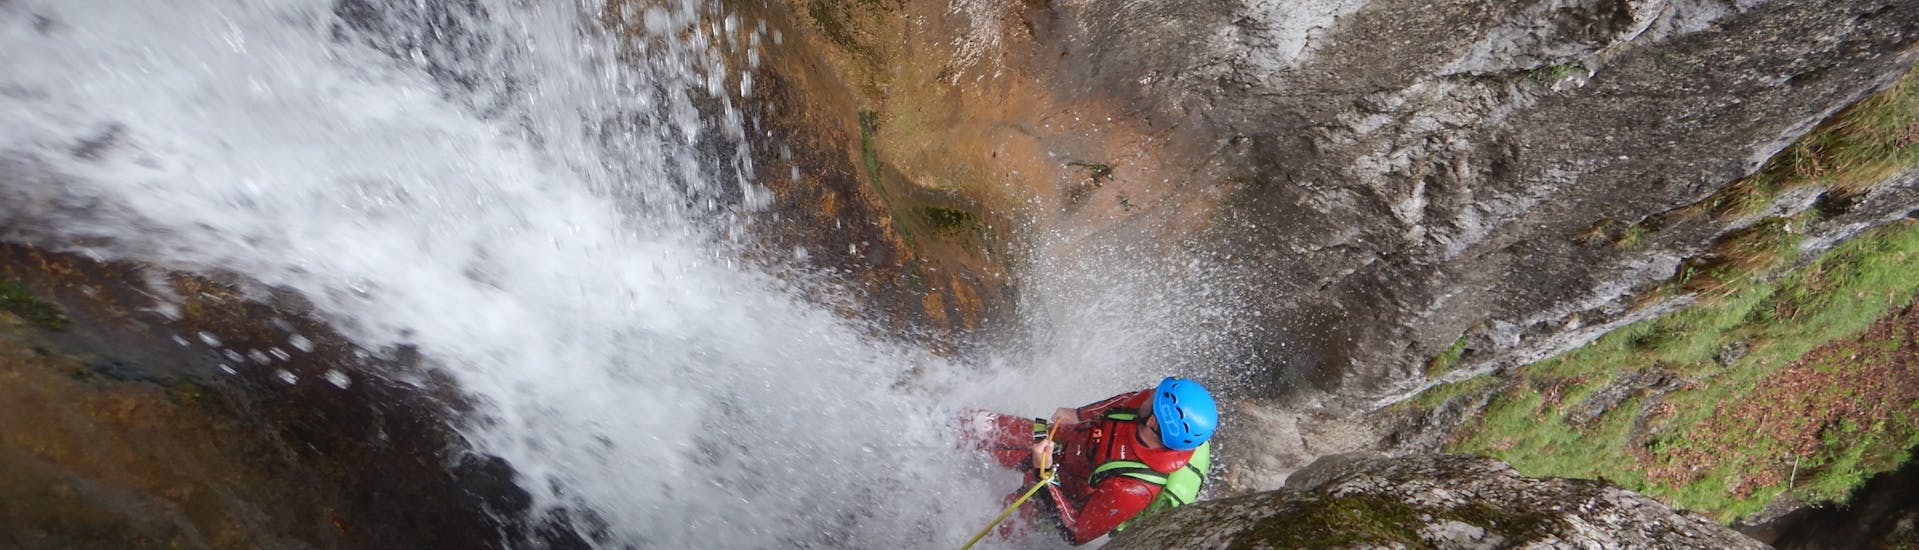 A man abseiling through a waterfall during the Canyoning in the Taxaklamm for Advanced - Waterfall Lovers with CIA Canyoning in Austria Kössen.